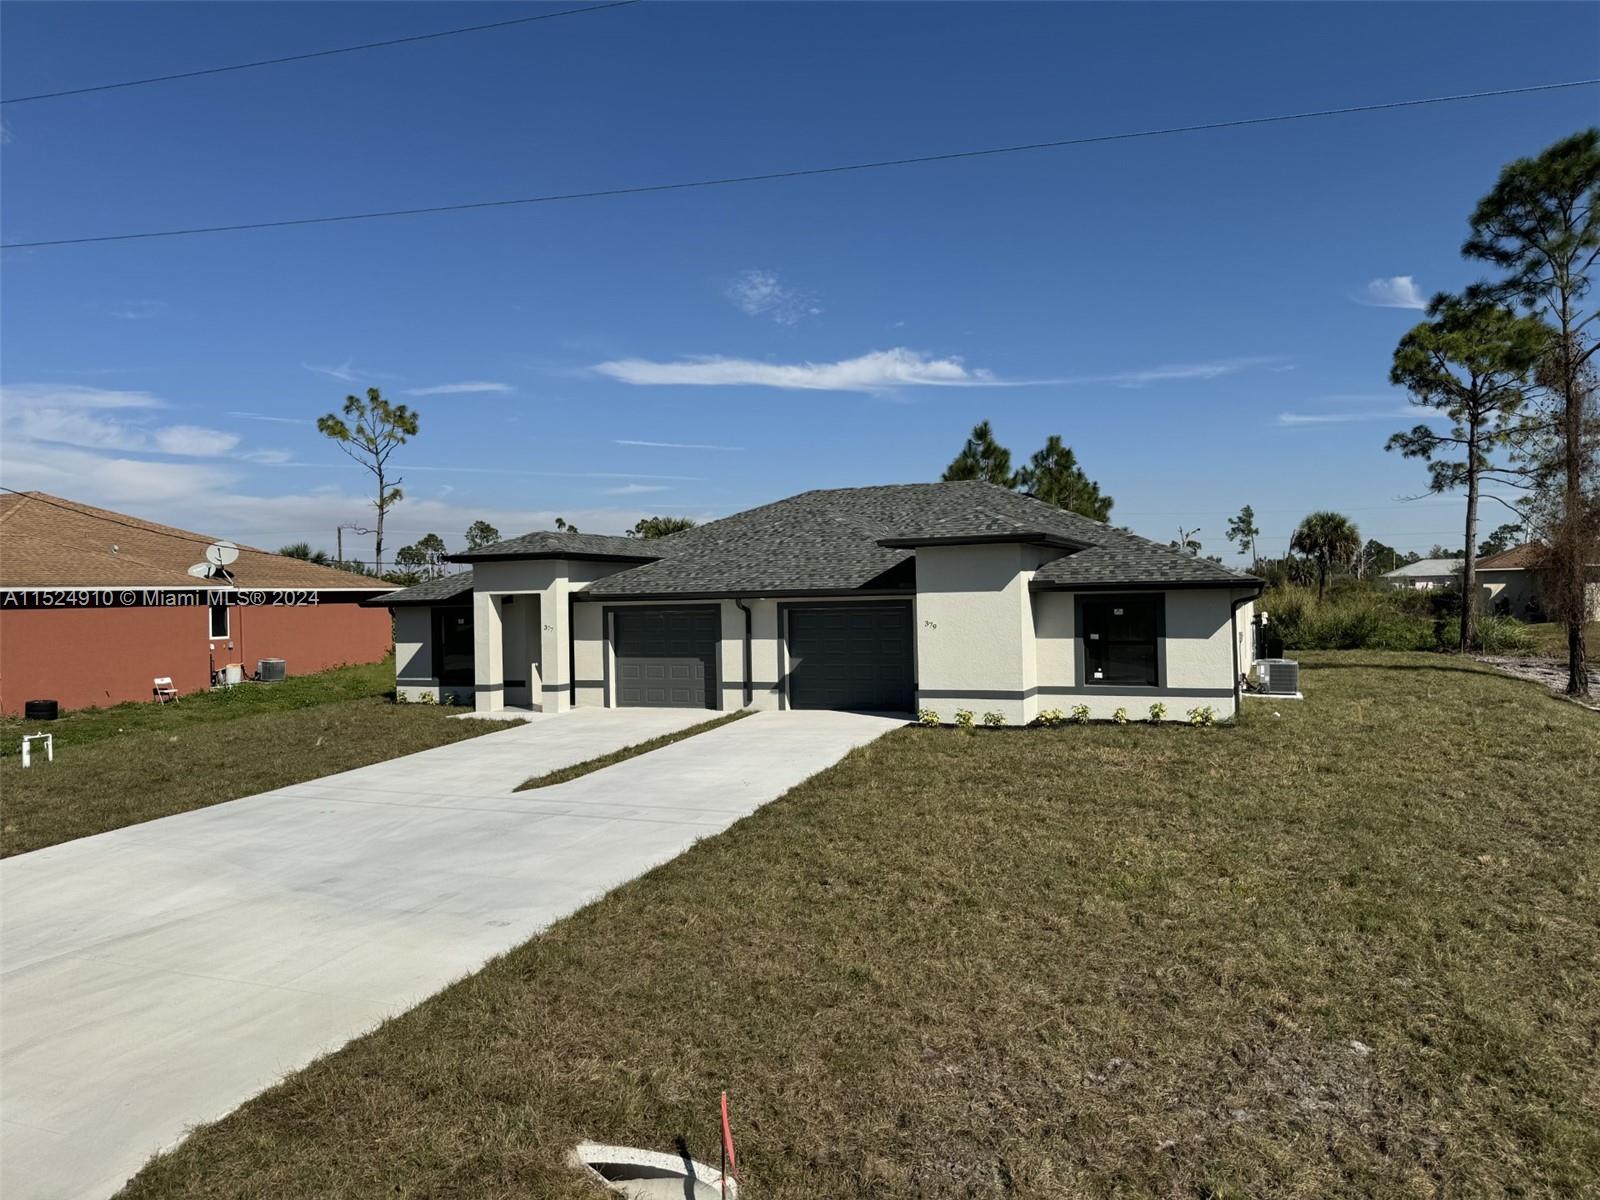 47364738 15th St Sw, Lehigh Acres, Lee County, Florida - 6 Bedrooms  
4 Bathrooms - 